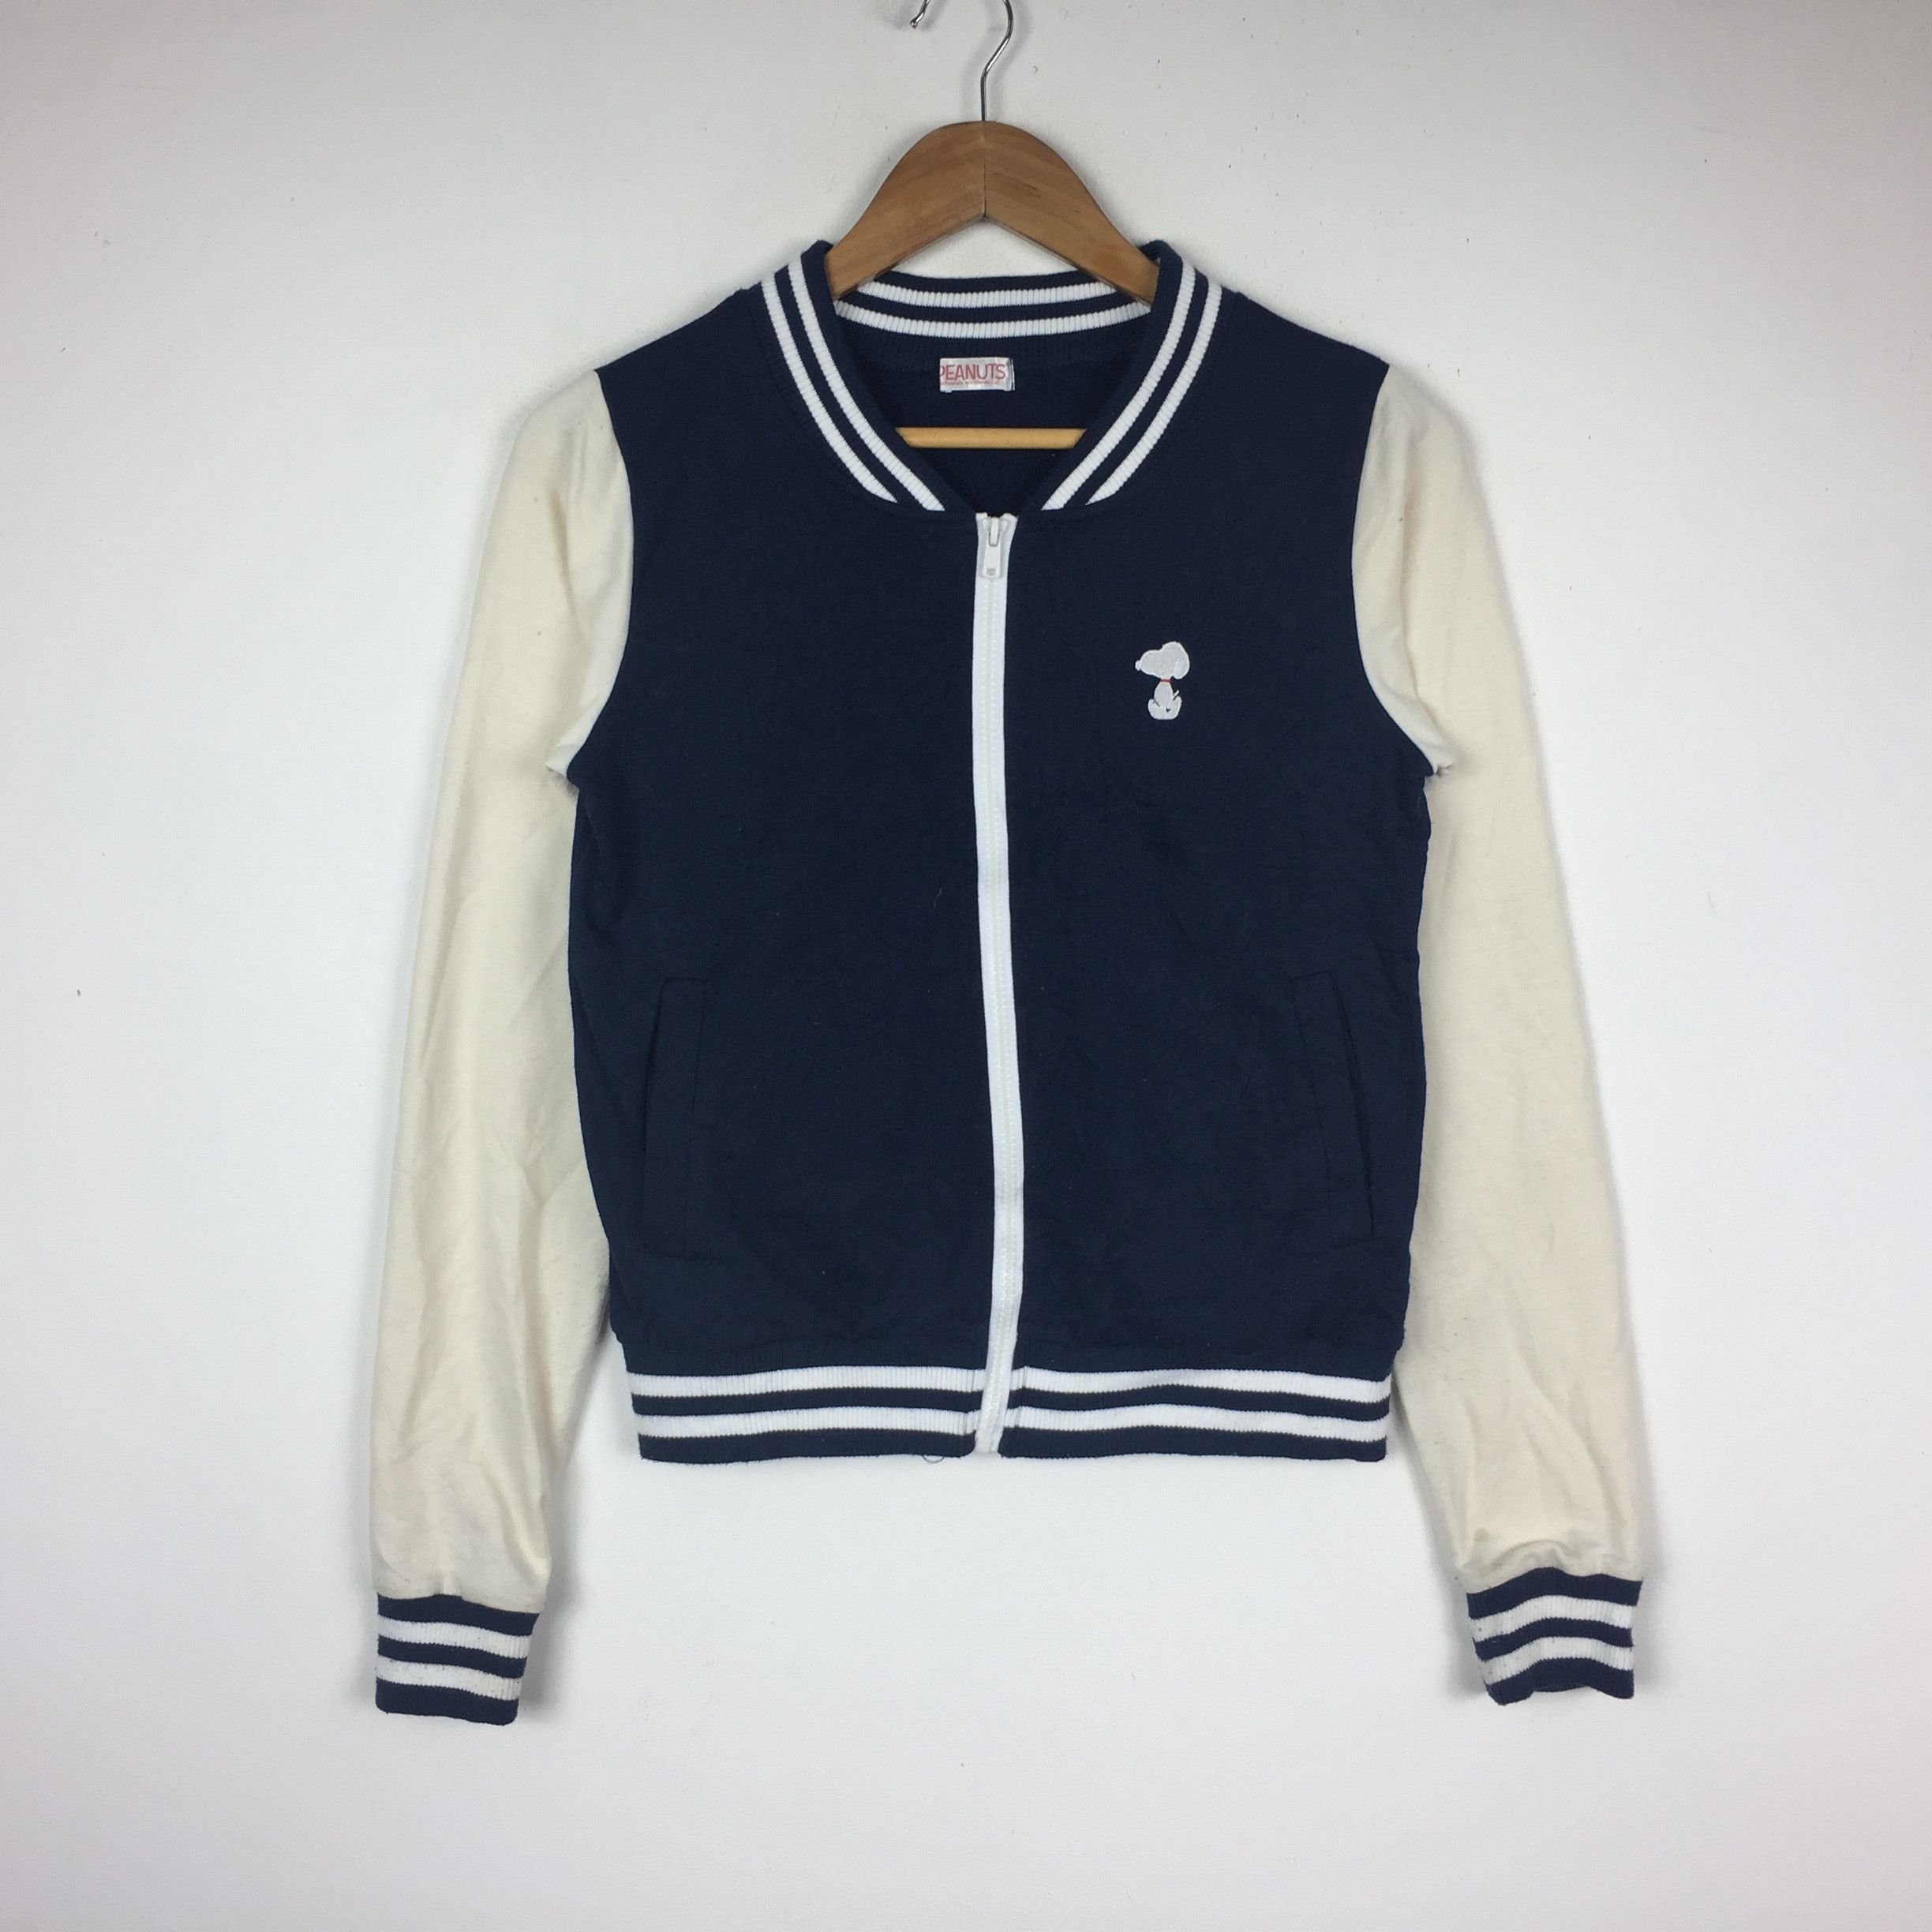 Uniqlo Vintage Peanuts Snoopy Rookie Of The Year Varsity Jacket Size US S / EU 44-46 / 1 - 1 Preview